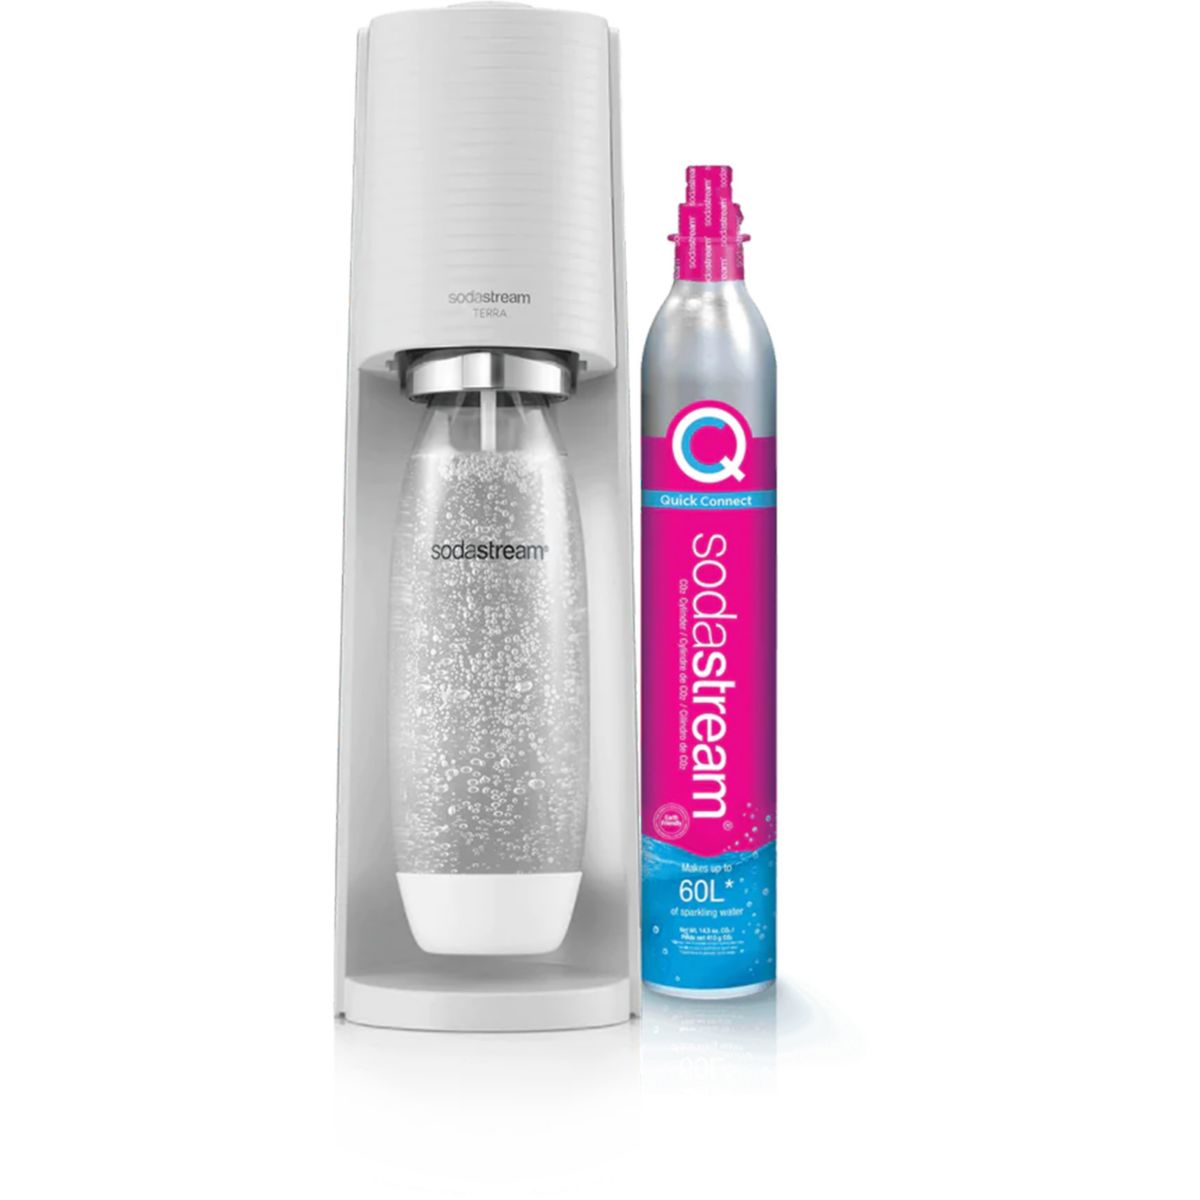 Sodastream machine a soda cool, 1 cylindre de co2, 1 bouteille 1l